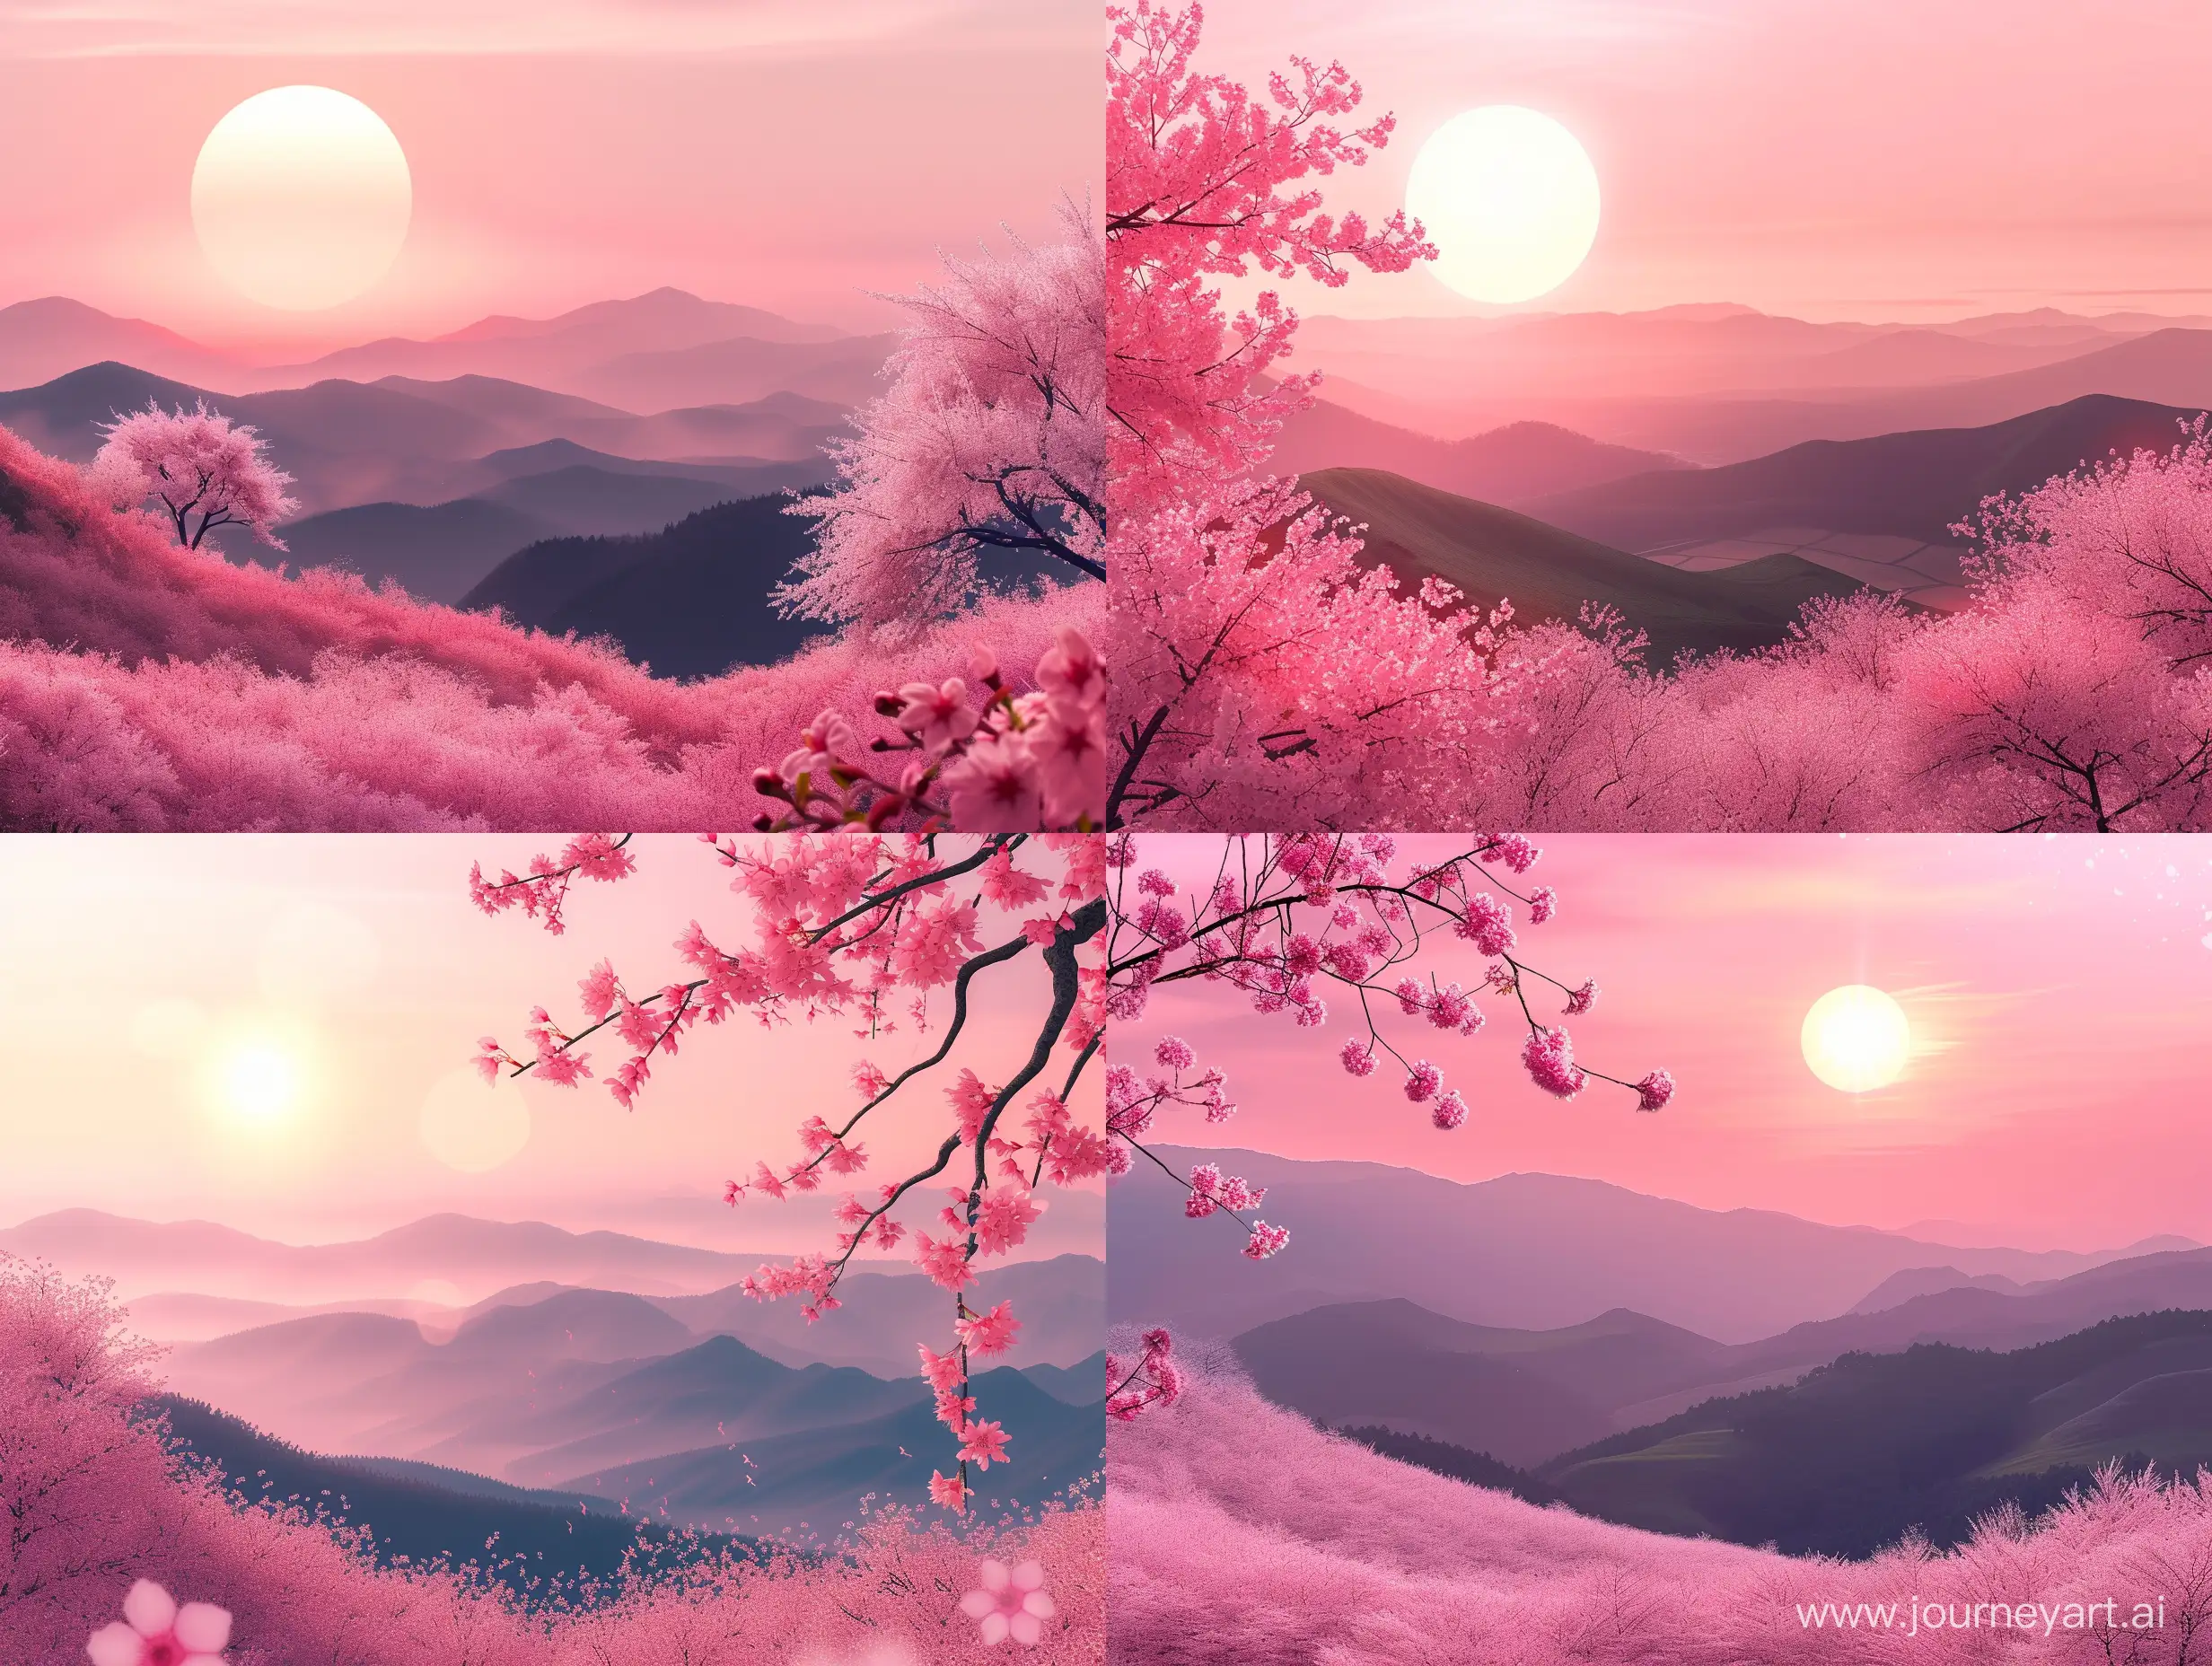 Serene-Spring-Cherry-Blossom-Landscape-with-Glowing-Pink-Sun-and-Hills